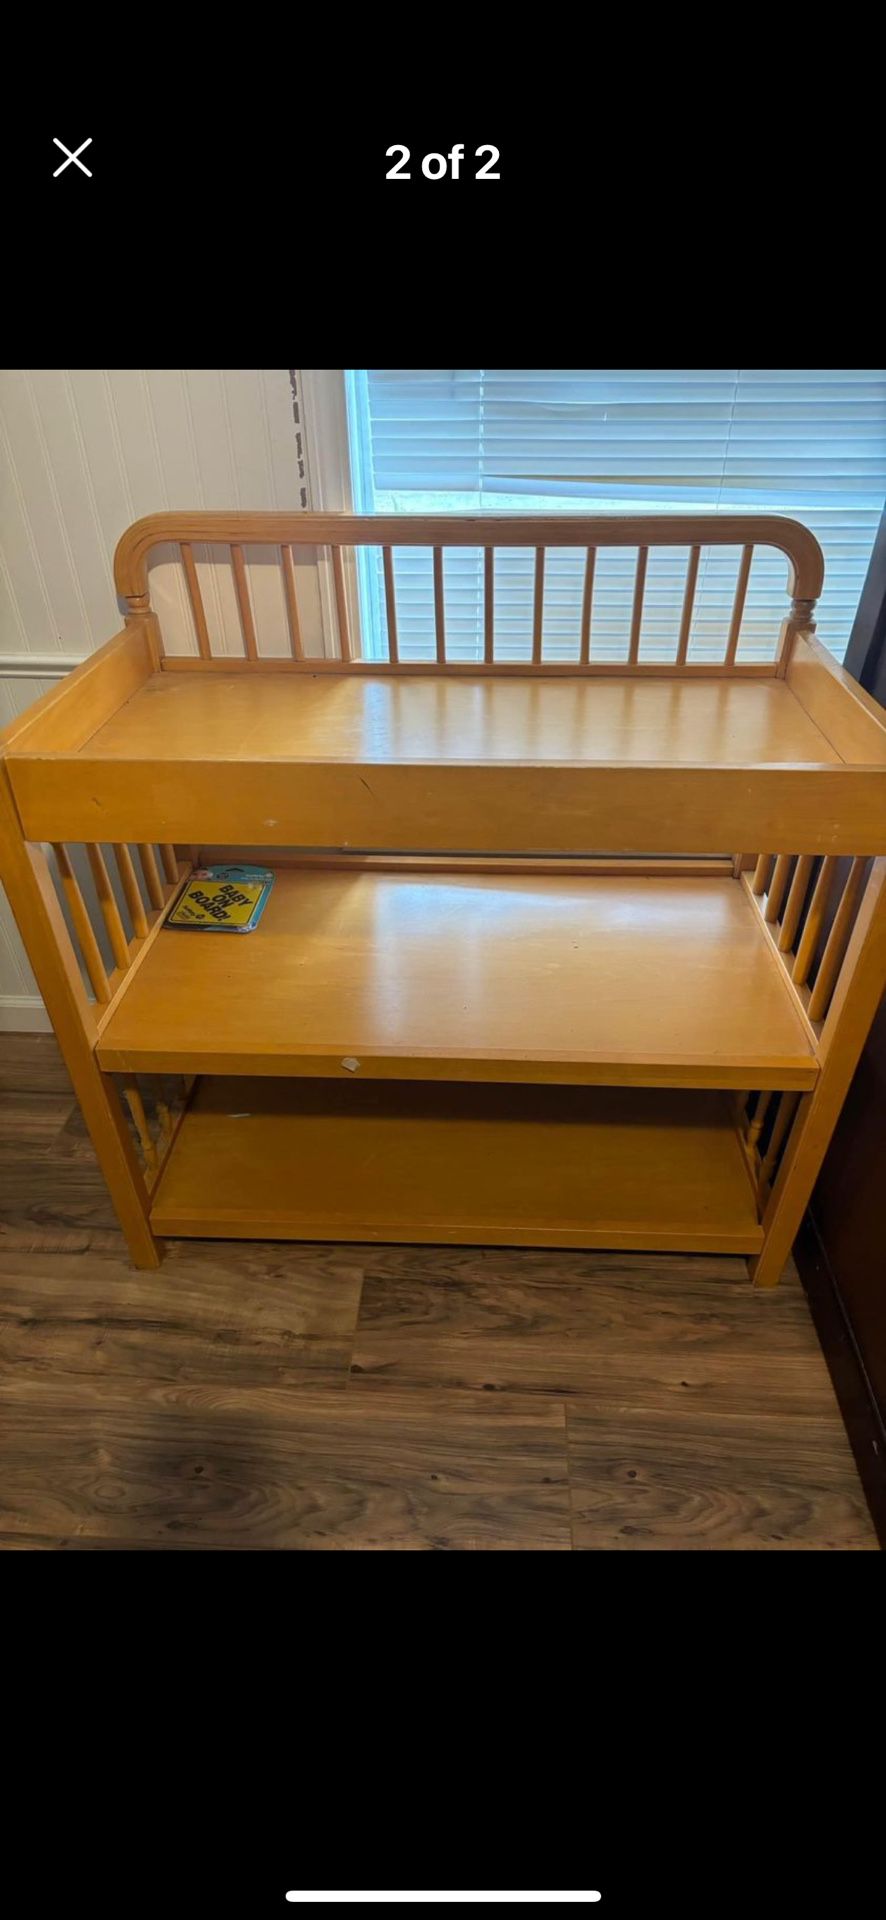 Changing Table